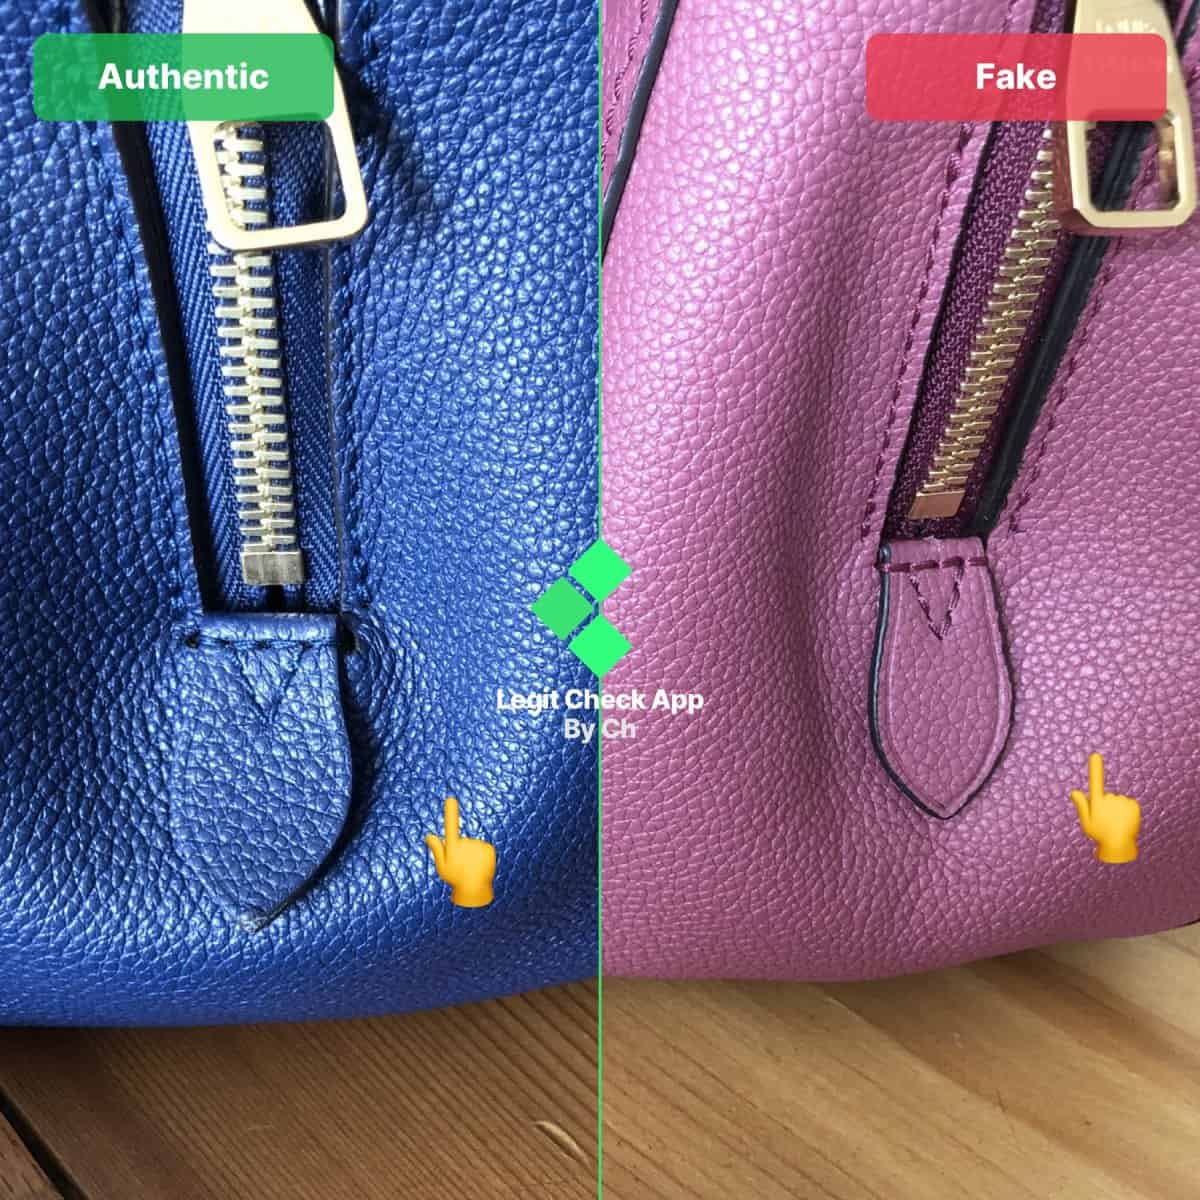 how to spot fake lv bags